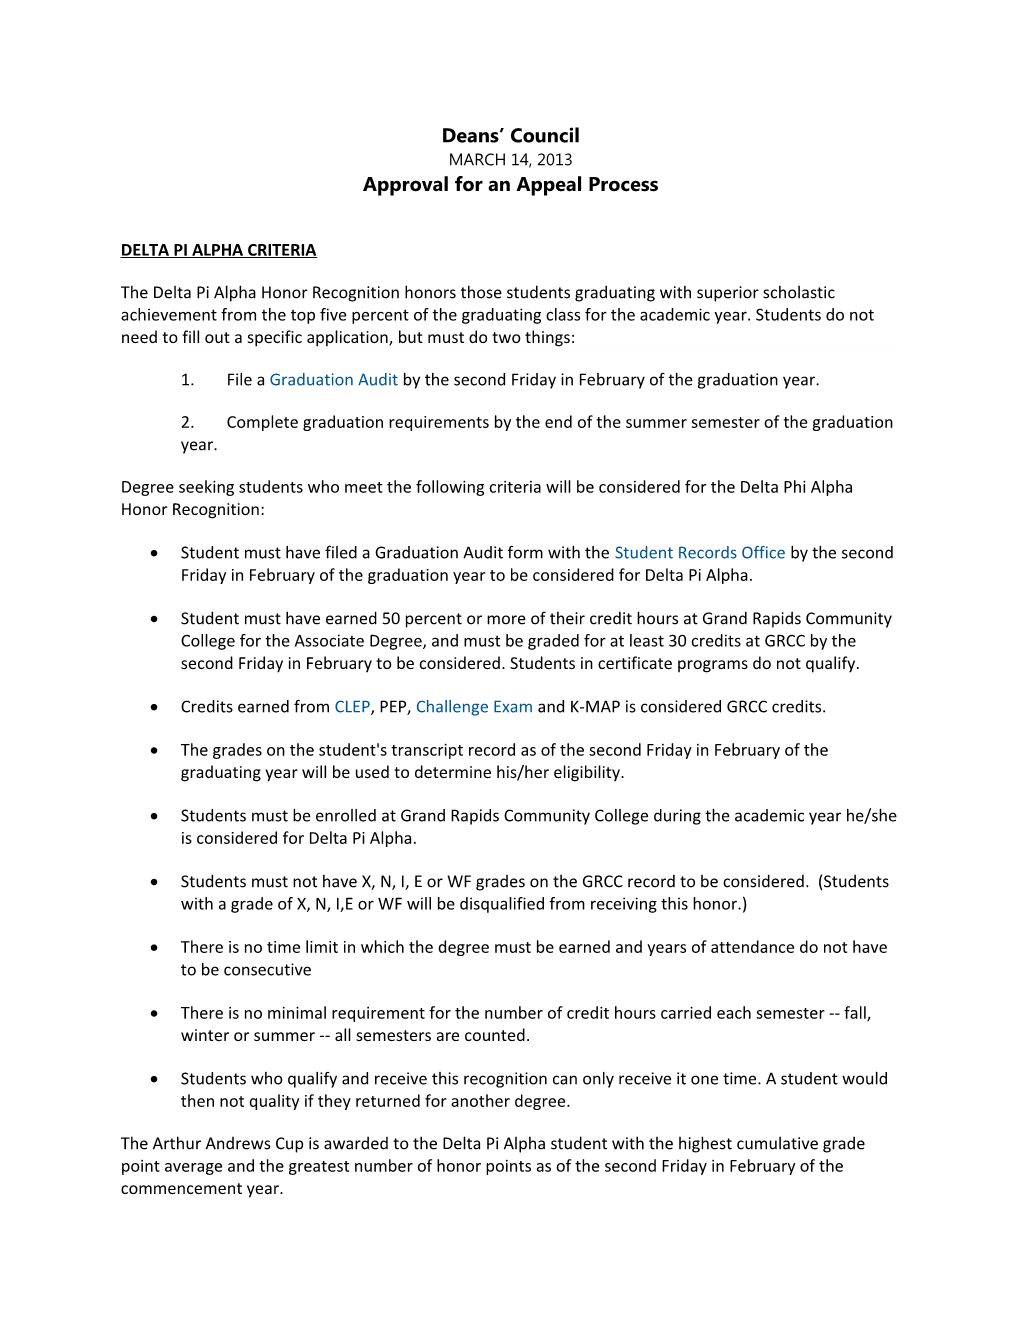 Approval for an Appeal Process